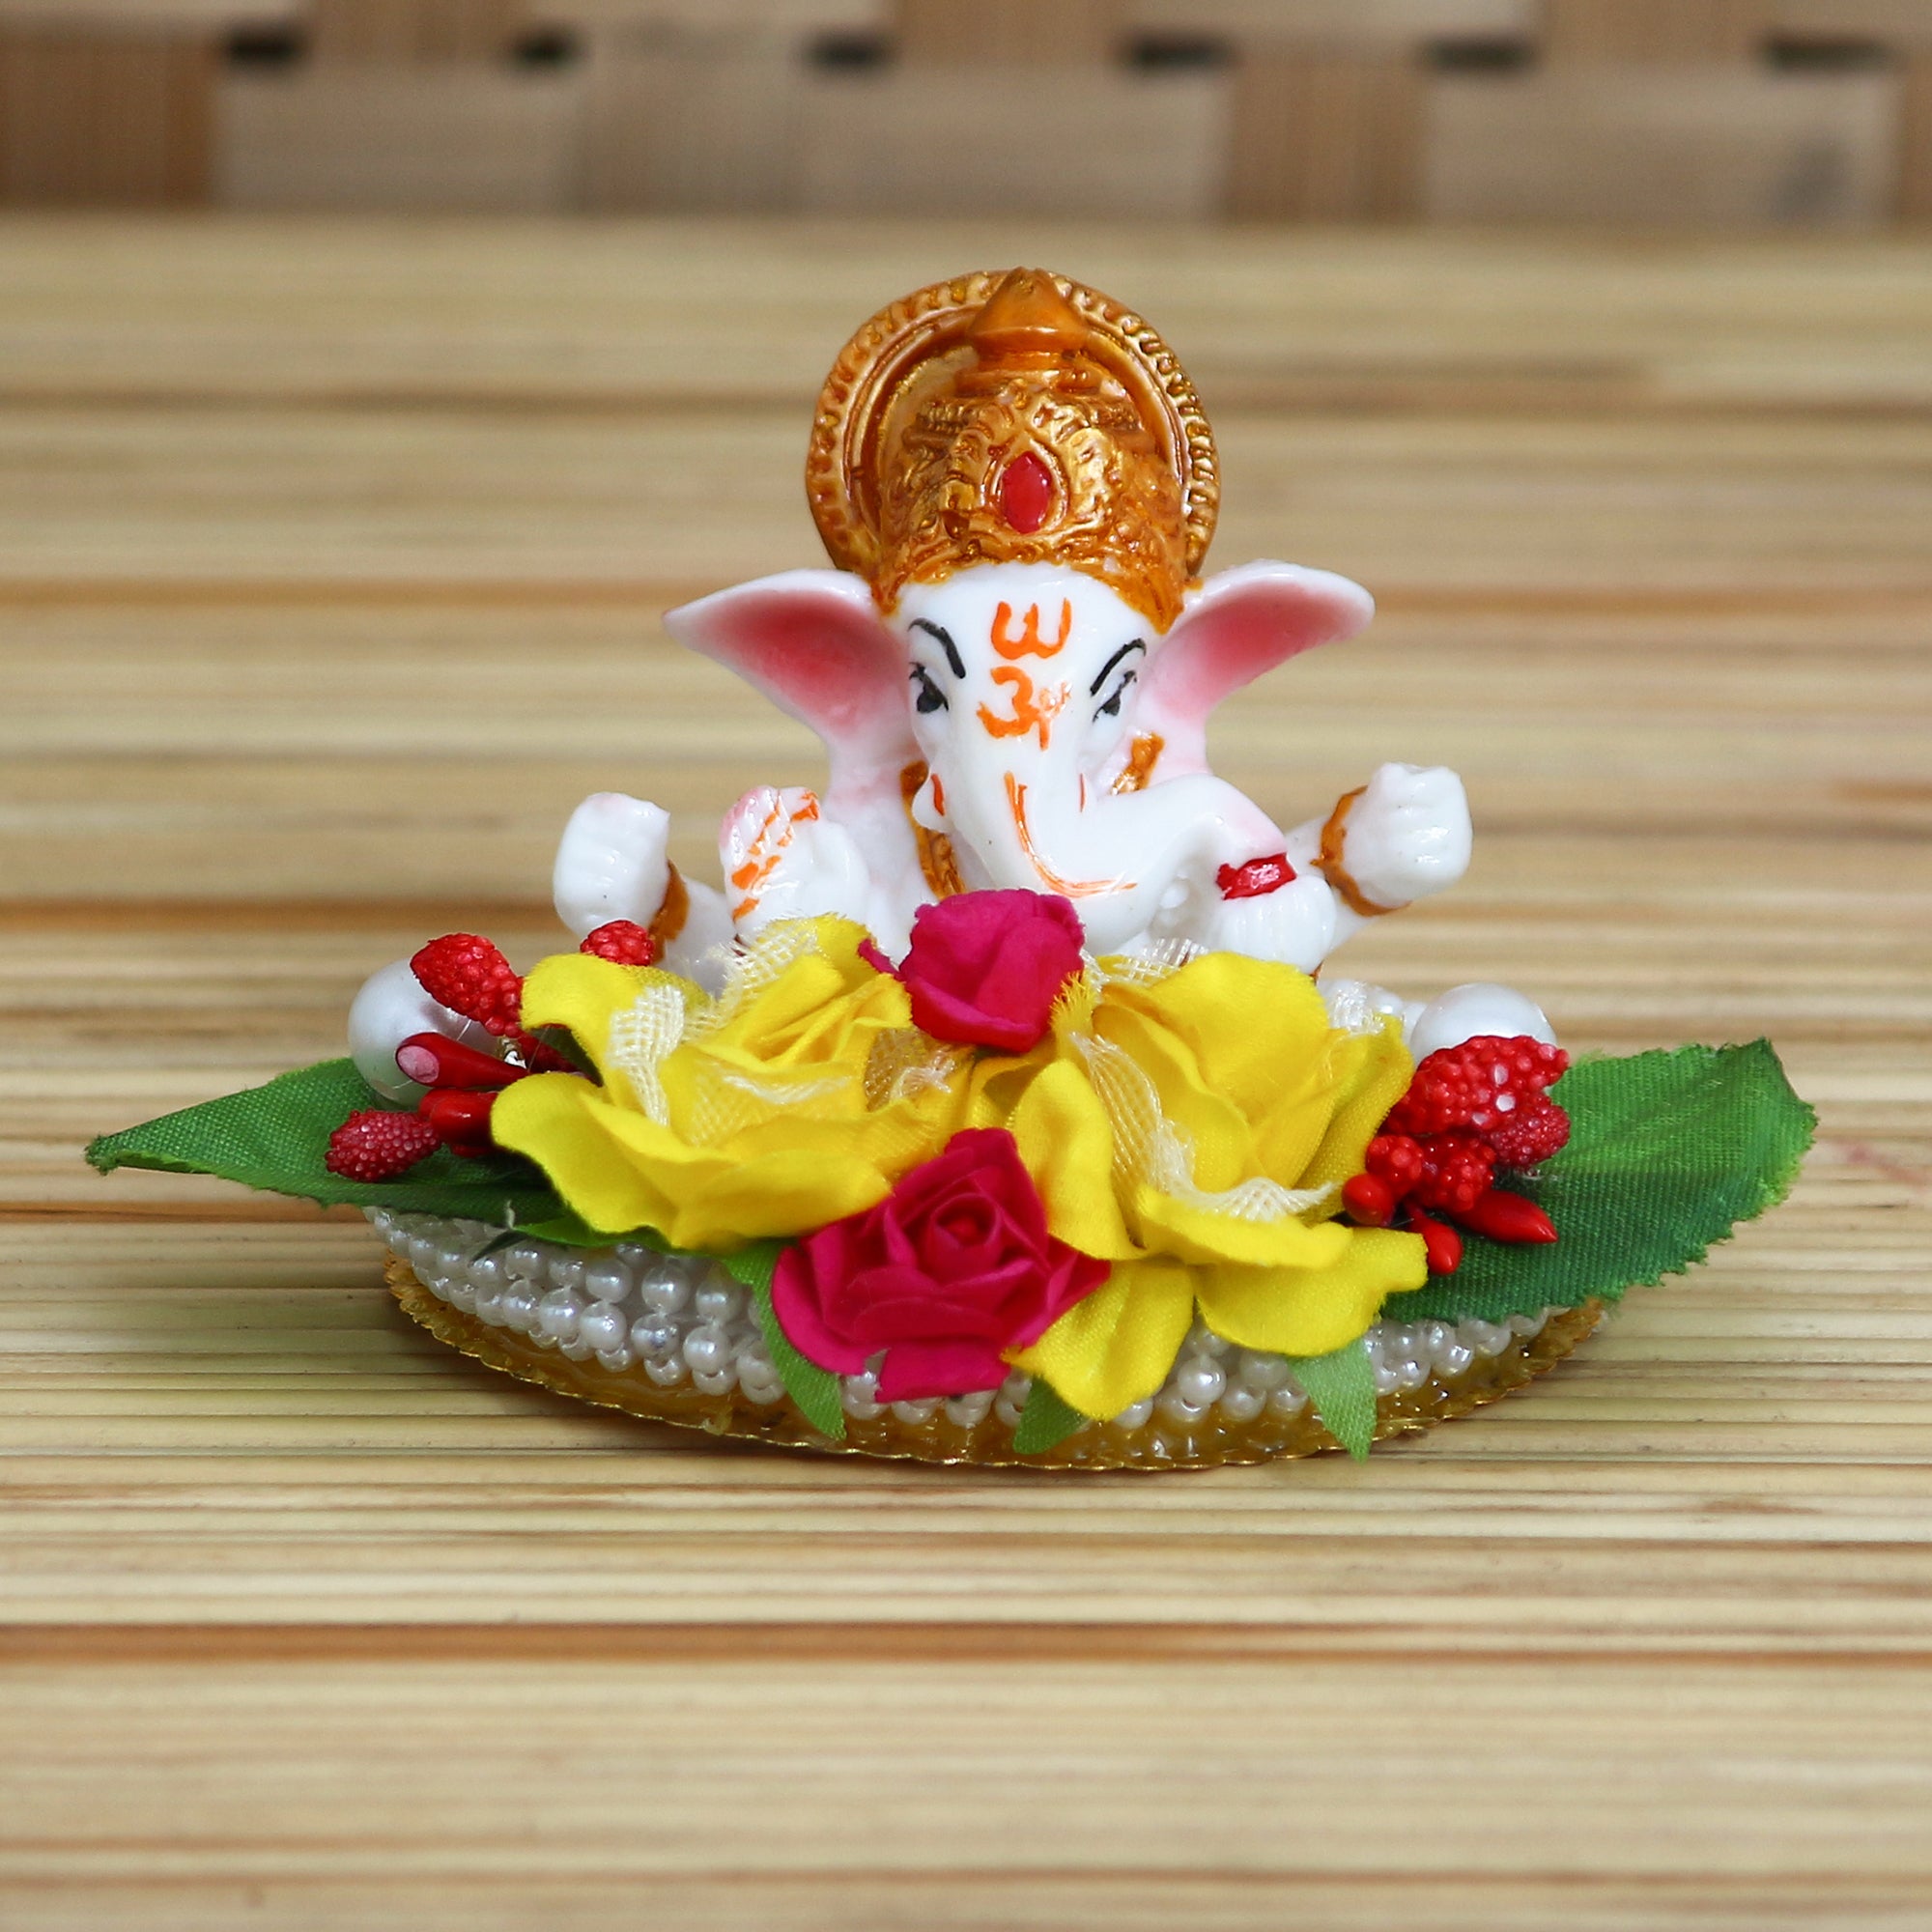 Lord Ganesha Idol on Decorative Handcrafted Plate with Colorful Flowers and Leaf